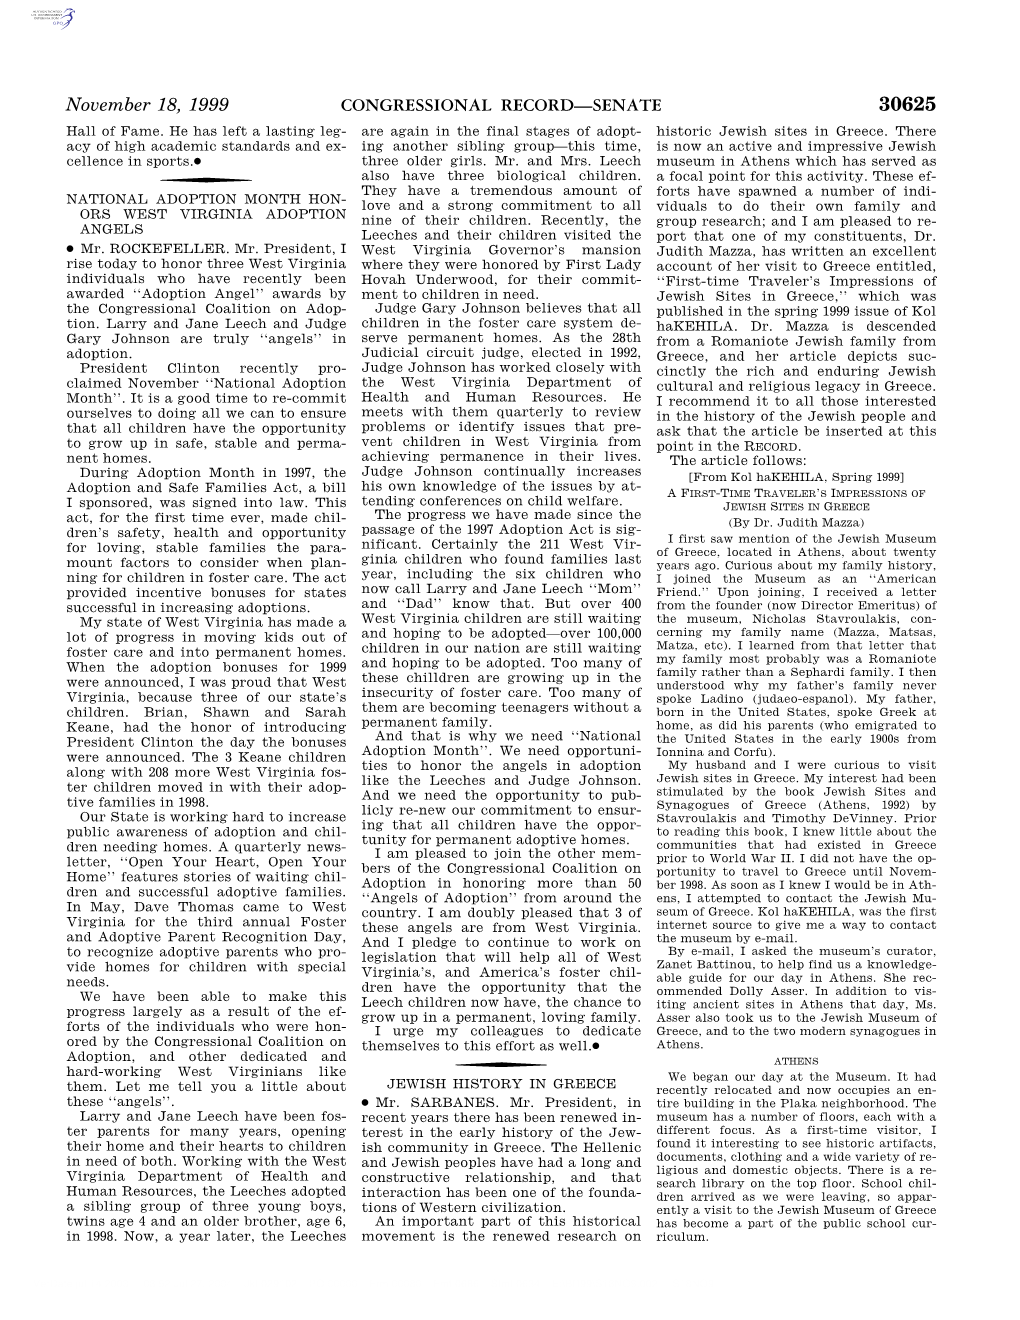 CONGRESSIONAL RECORD—SENATE November 18, 1999 After We Left the Museum, We Visited the We Also Visited the Jewish Museum of Communications and the Internet